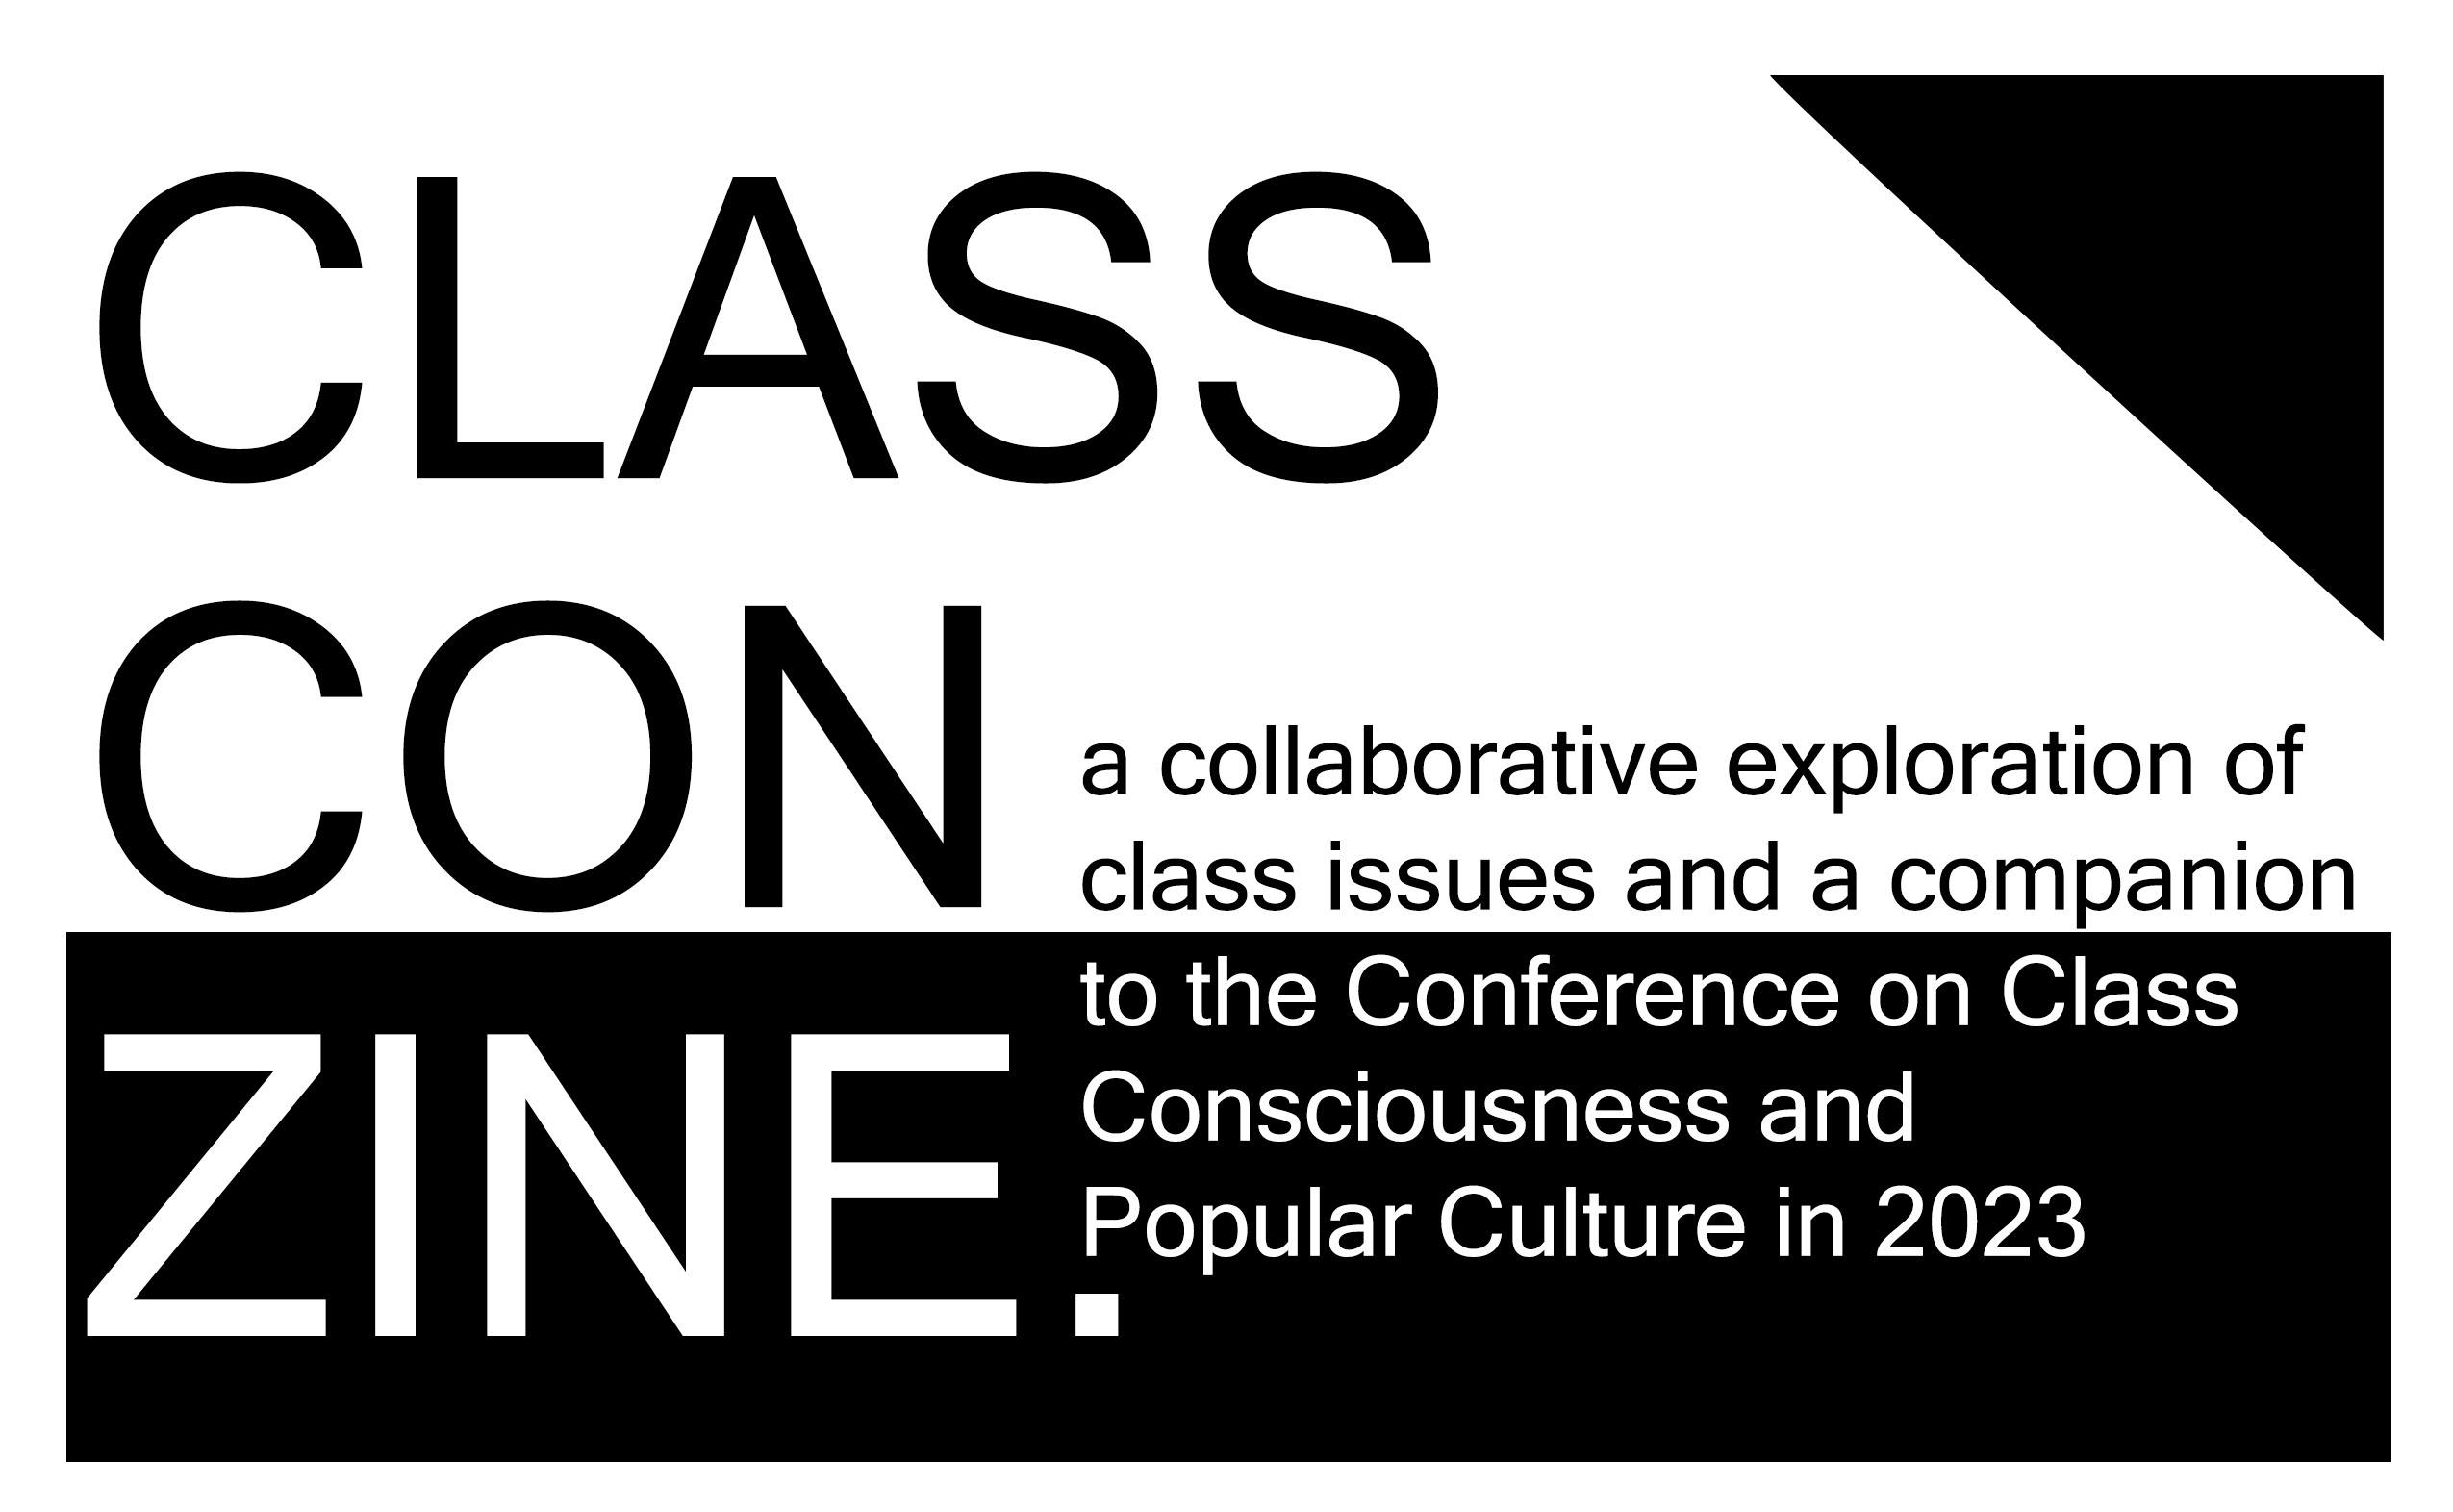 Class Con Zine - A Collaborative Exploration of Class Issues